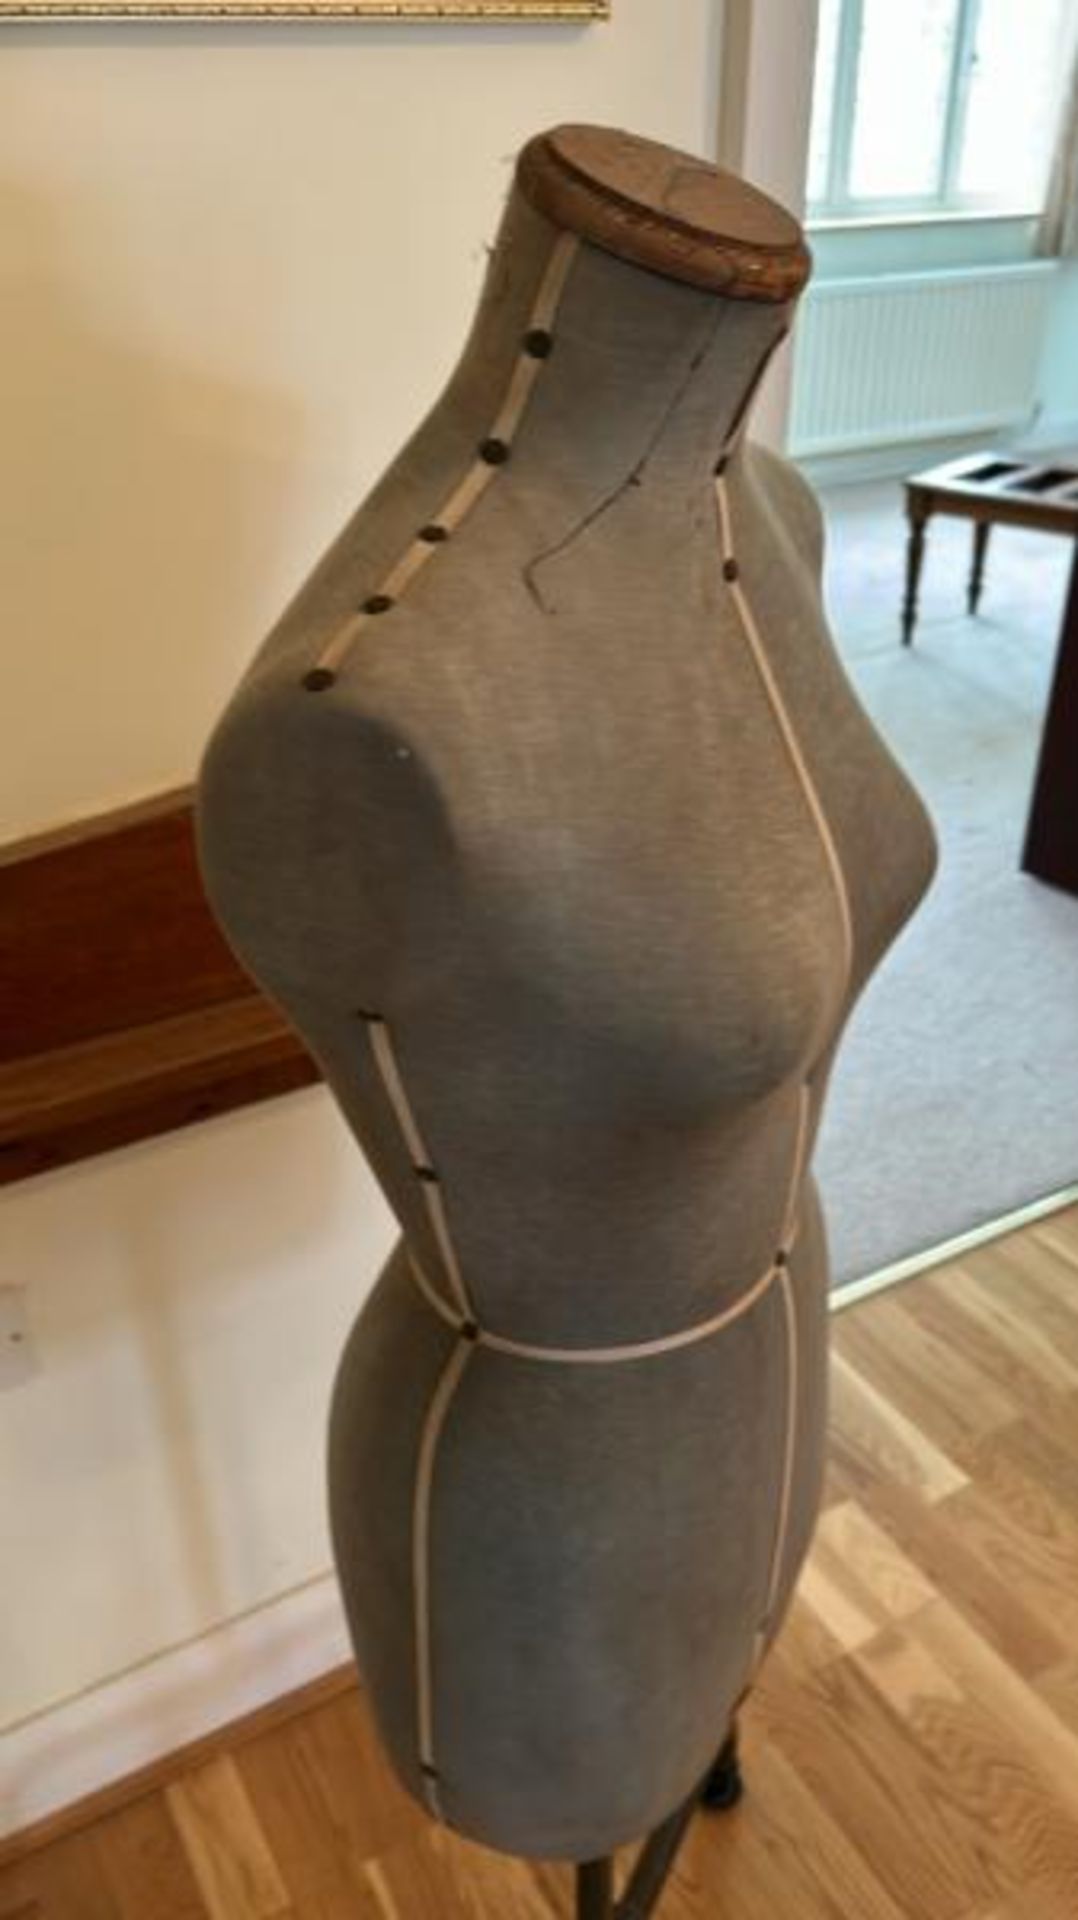 Vintage Singer dress makers mannequin (collection from private residence in Weybridge, Surrey) - Image 2 of 6